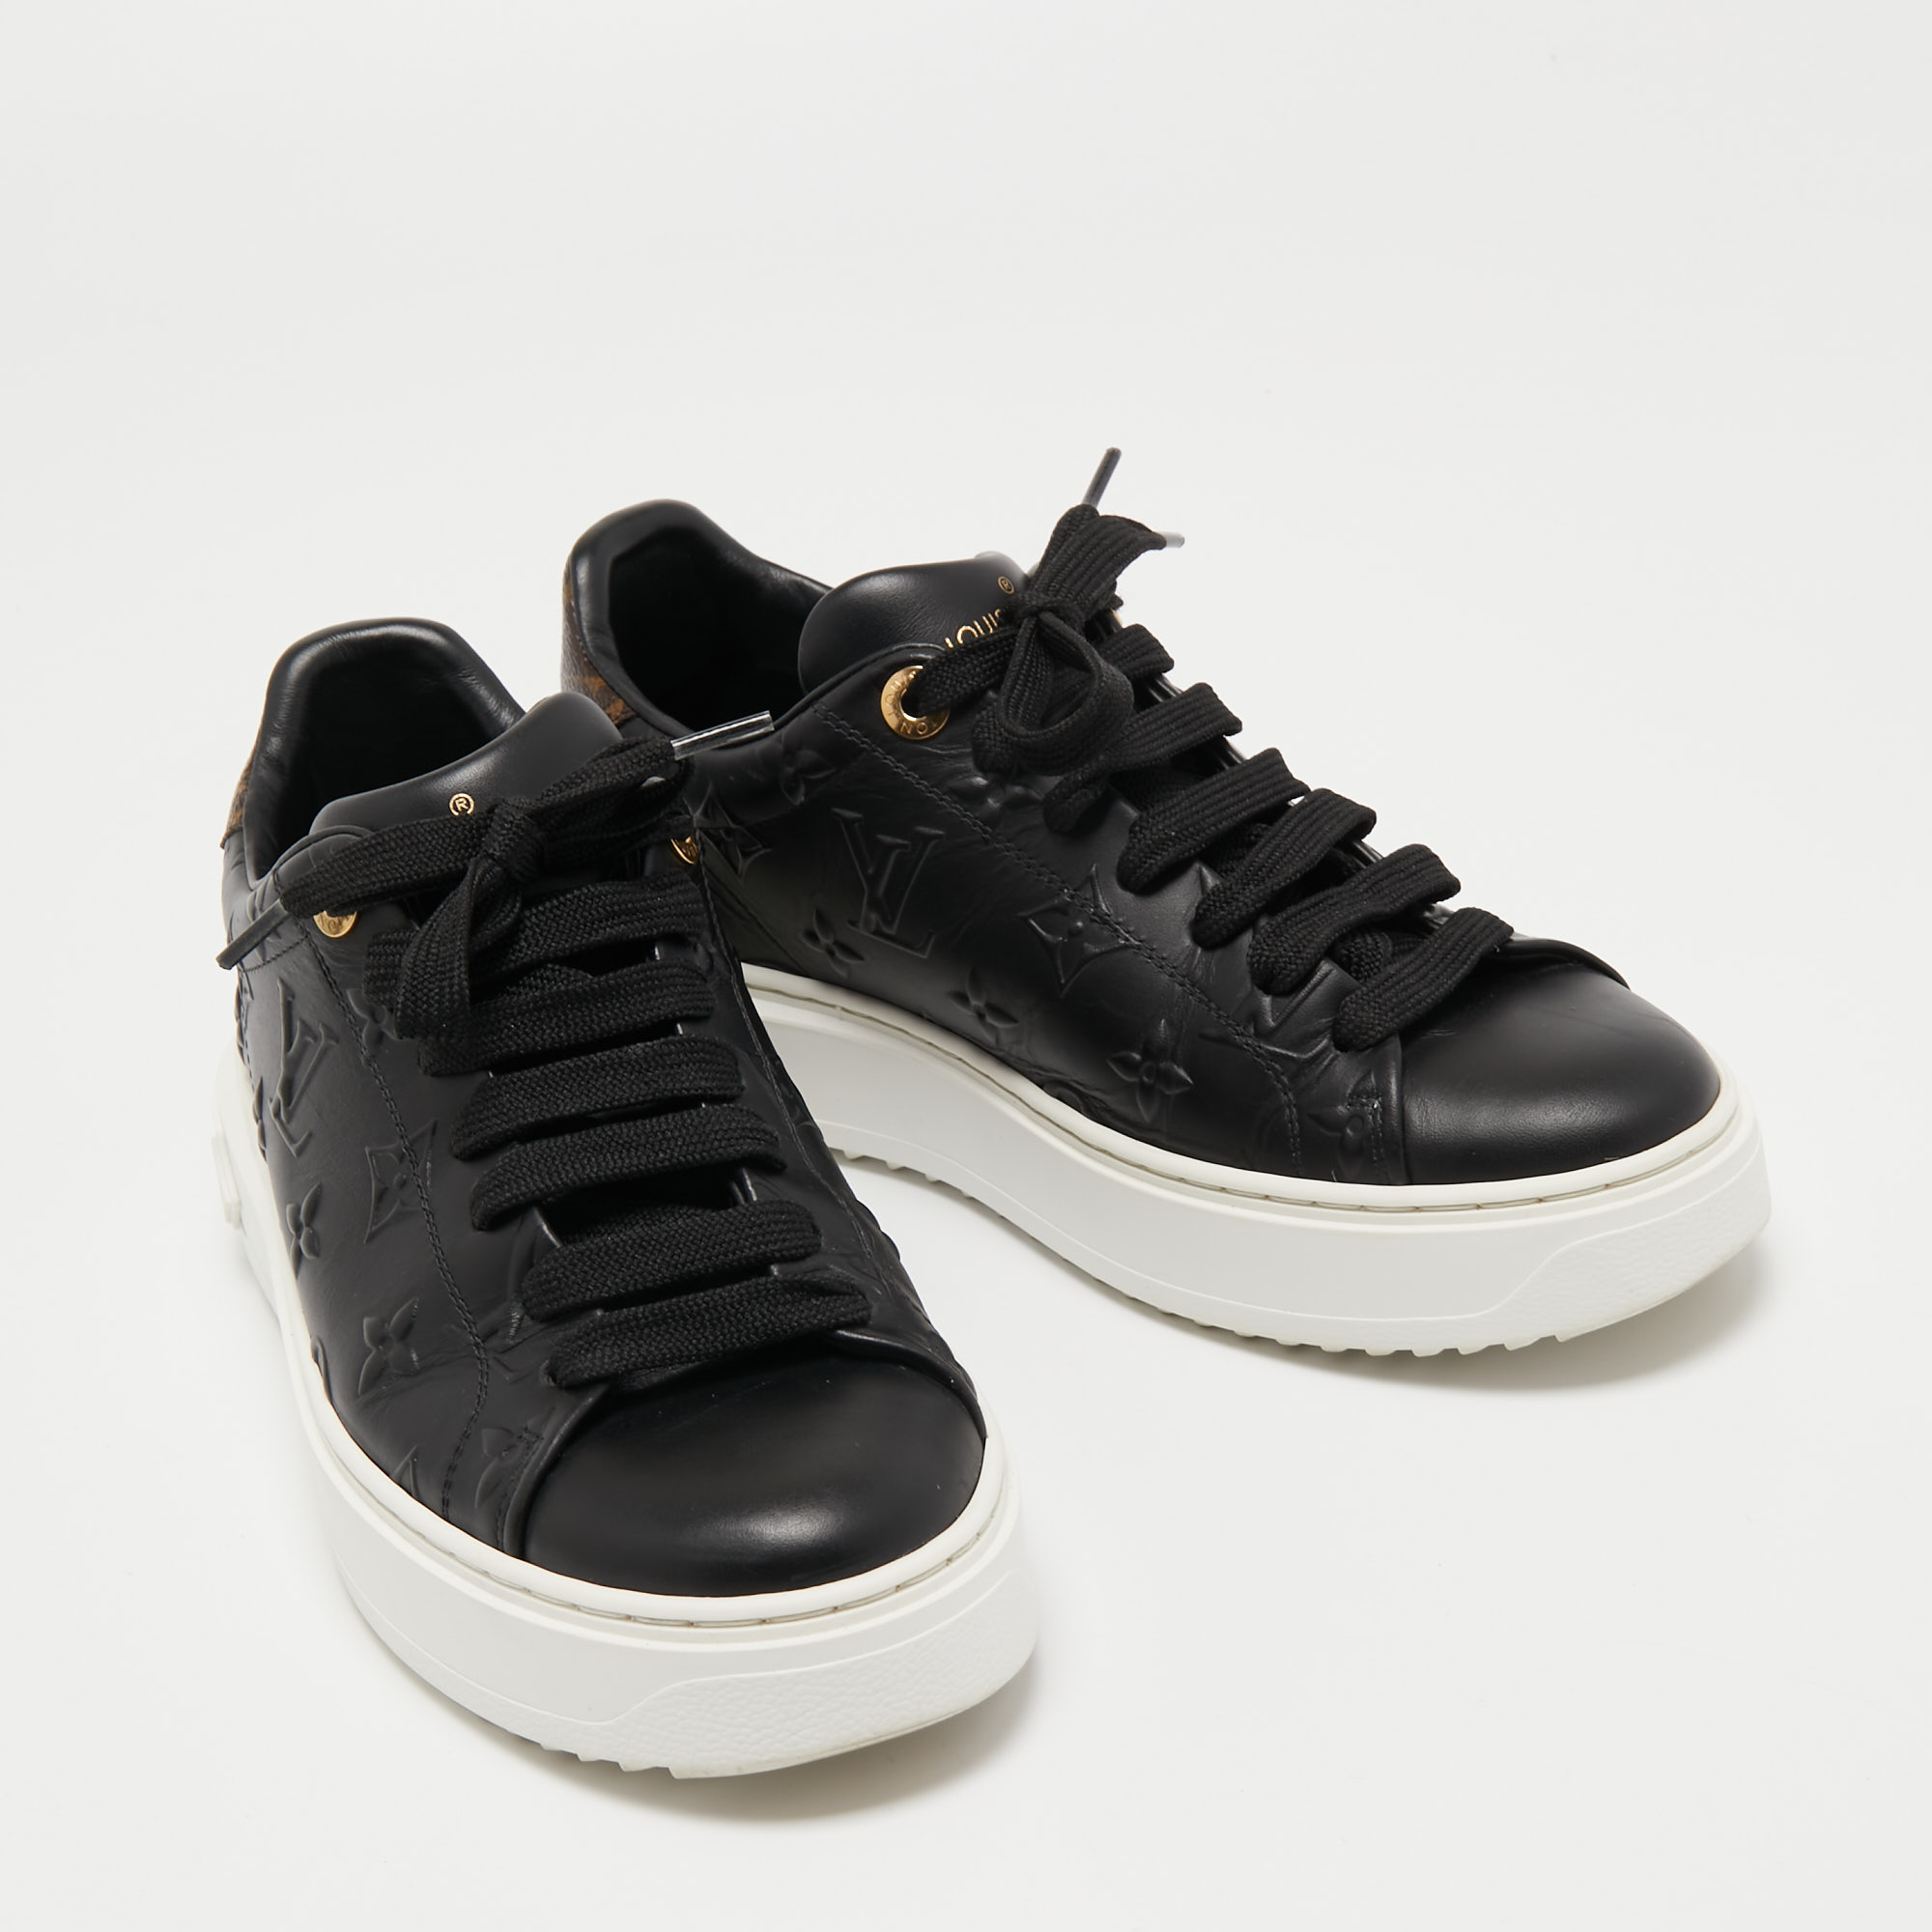 LOUIS VUITTON Calfskin Time Out Sneakers 36.5 Black 764891